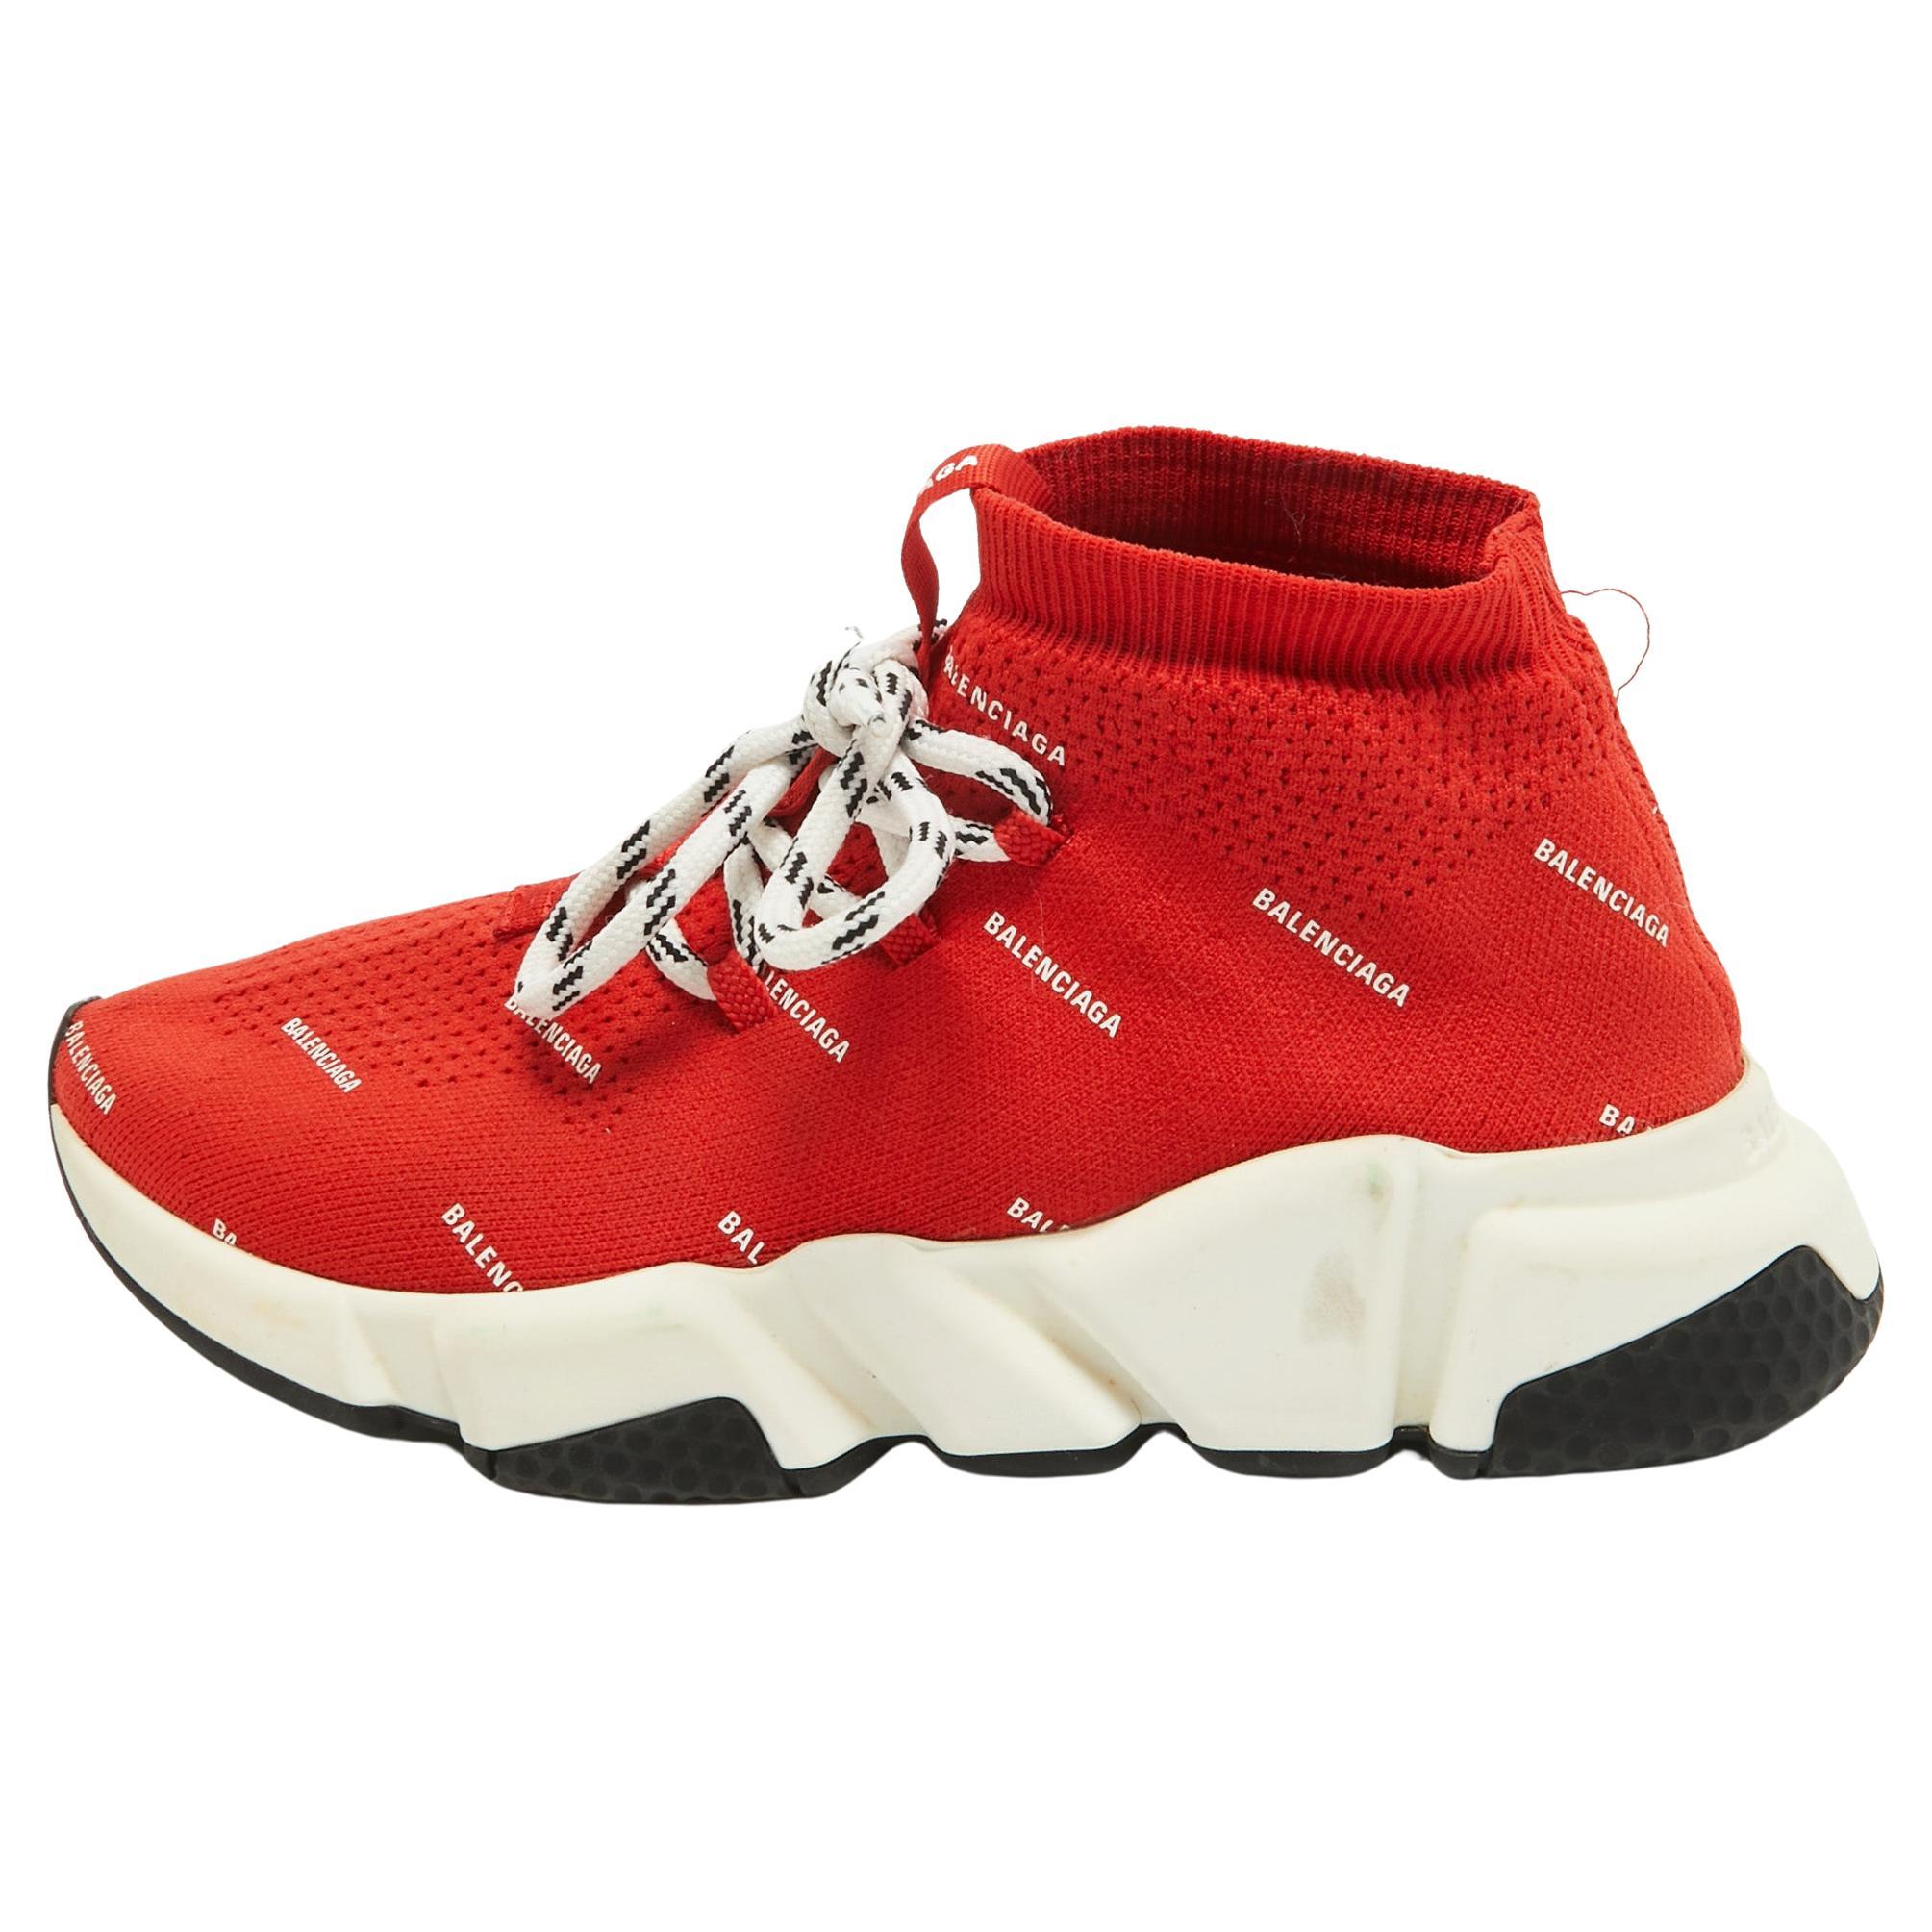 Balenciaga Red Knit Fabric Speed High Top Sneakers Size 36 For Sale